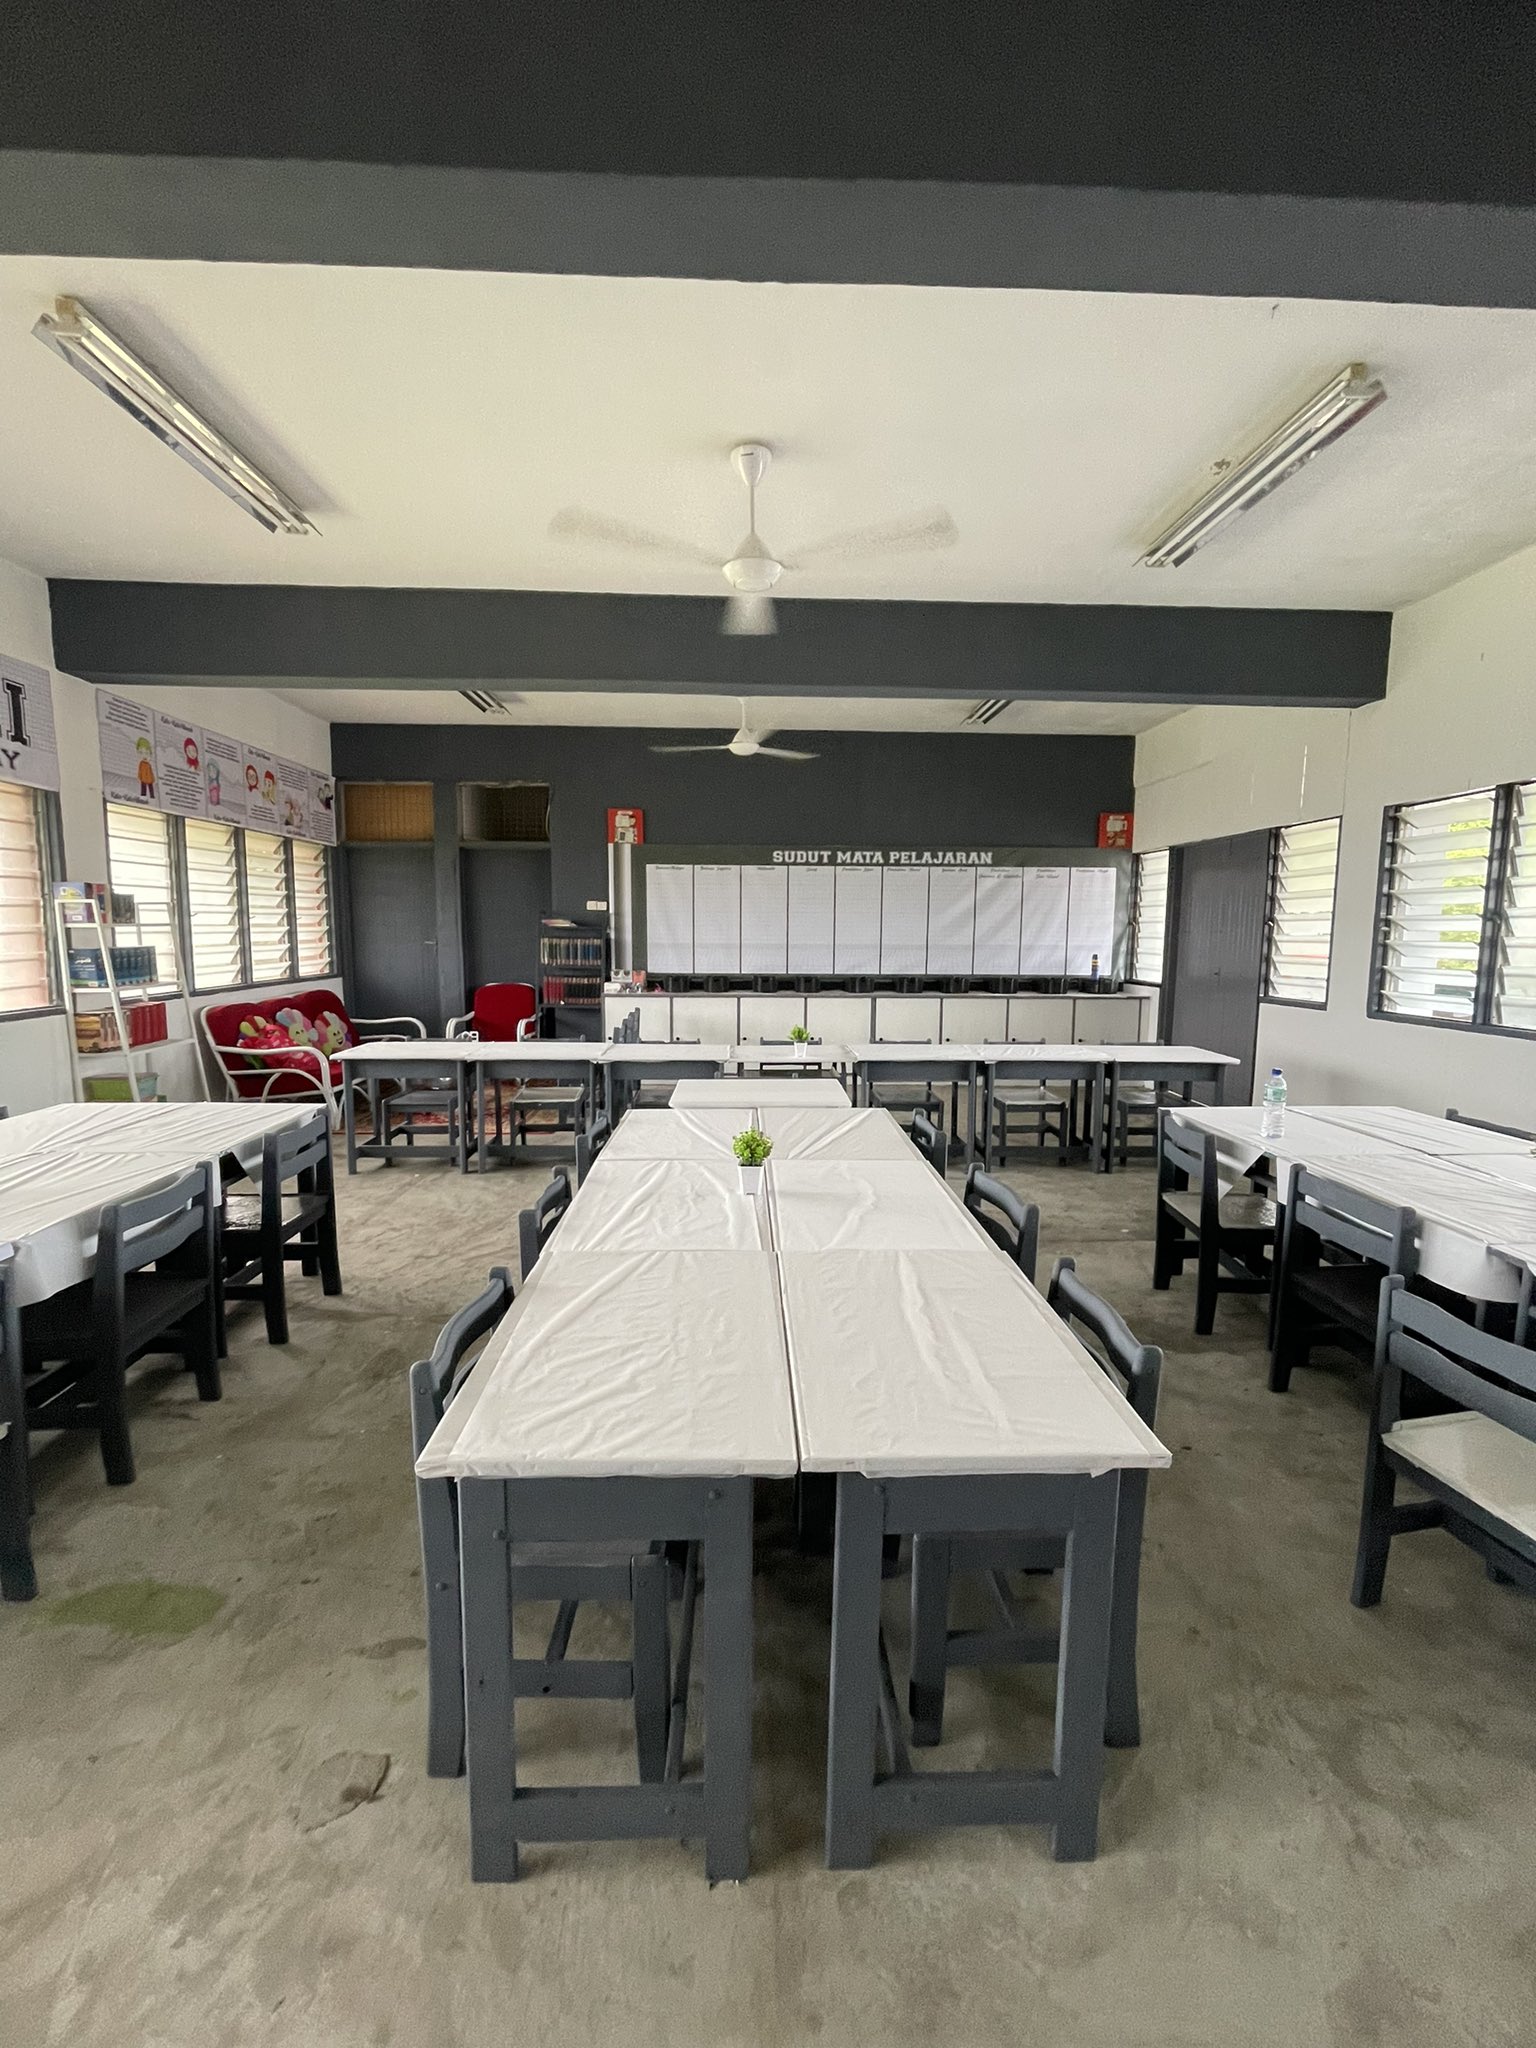 Aesthetic classroom in malaysia government primary school